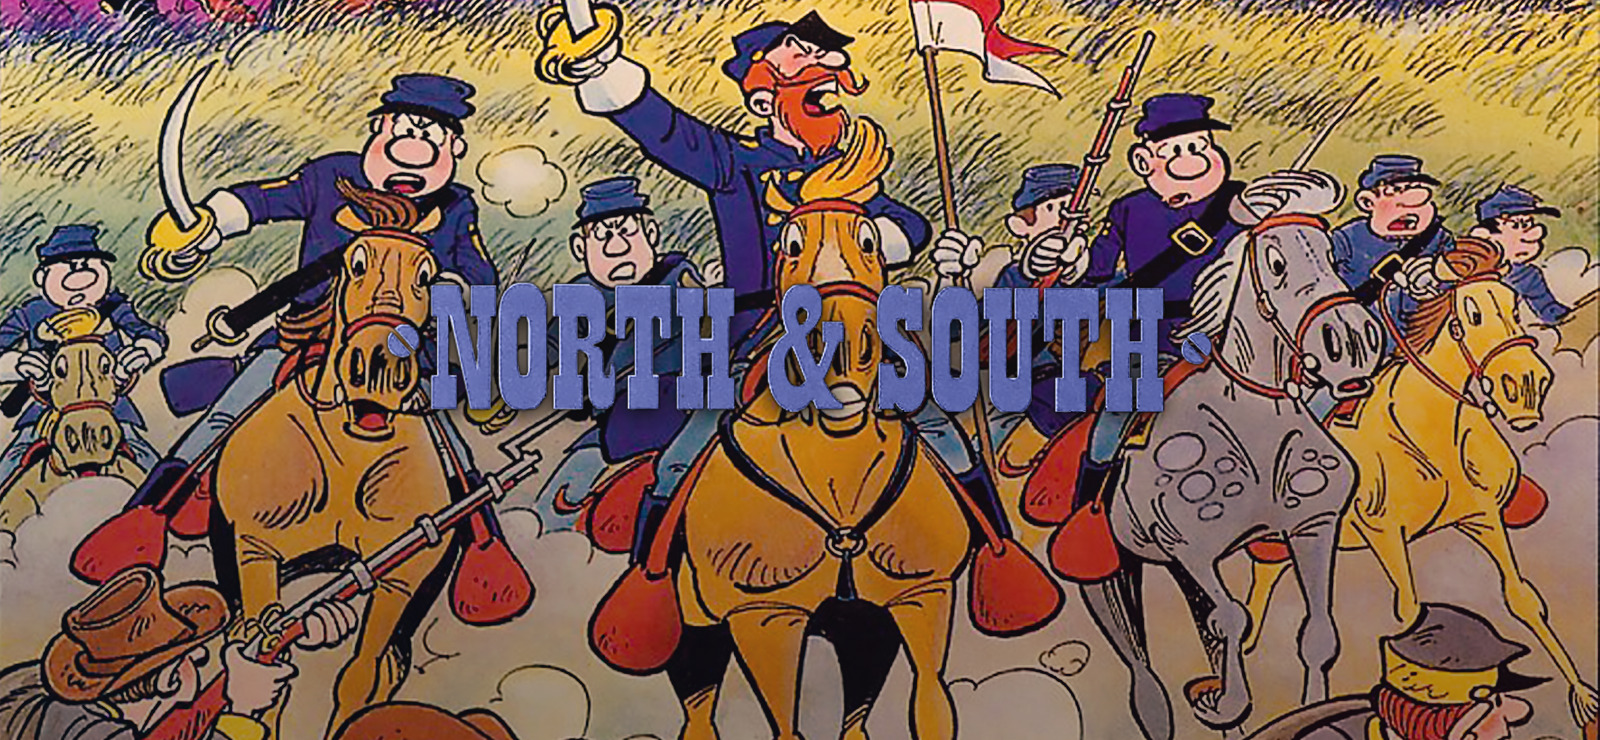 The Bluecoats: North South, 56% OFF | www.elevate.in